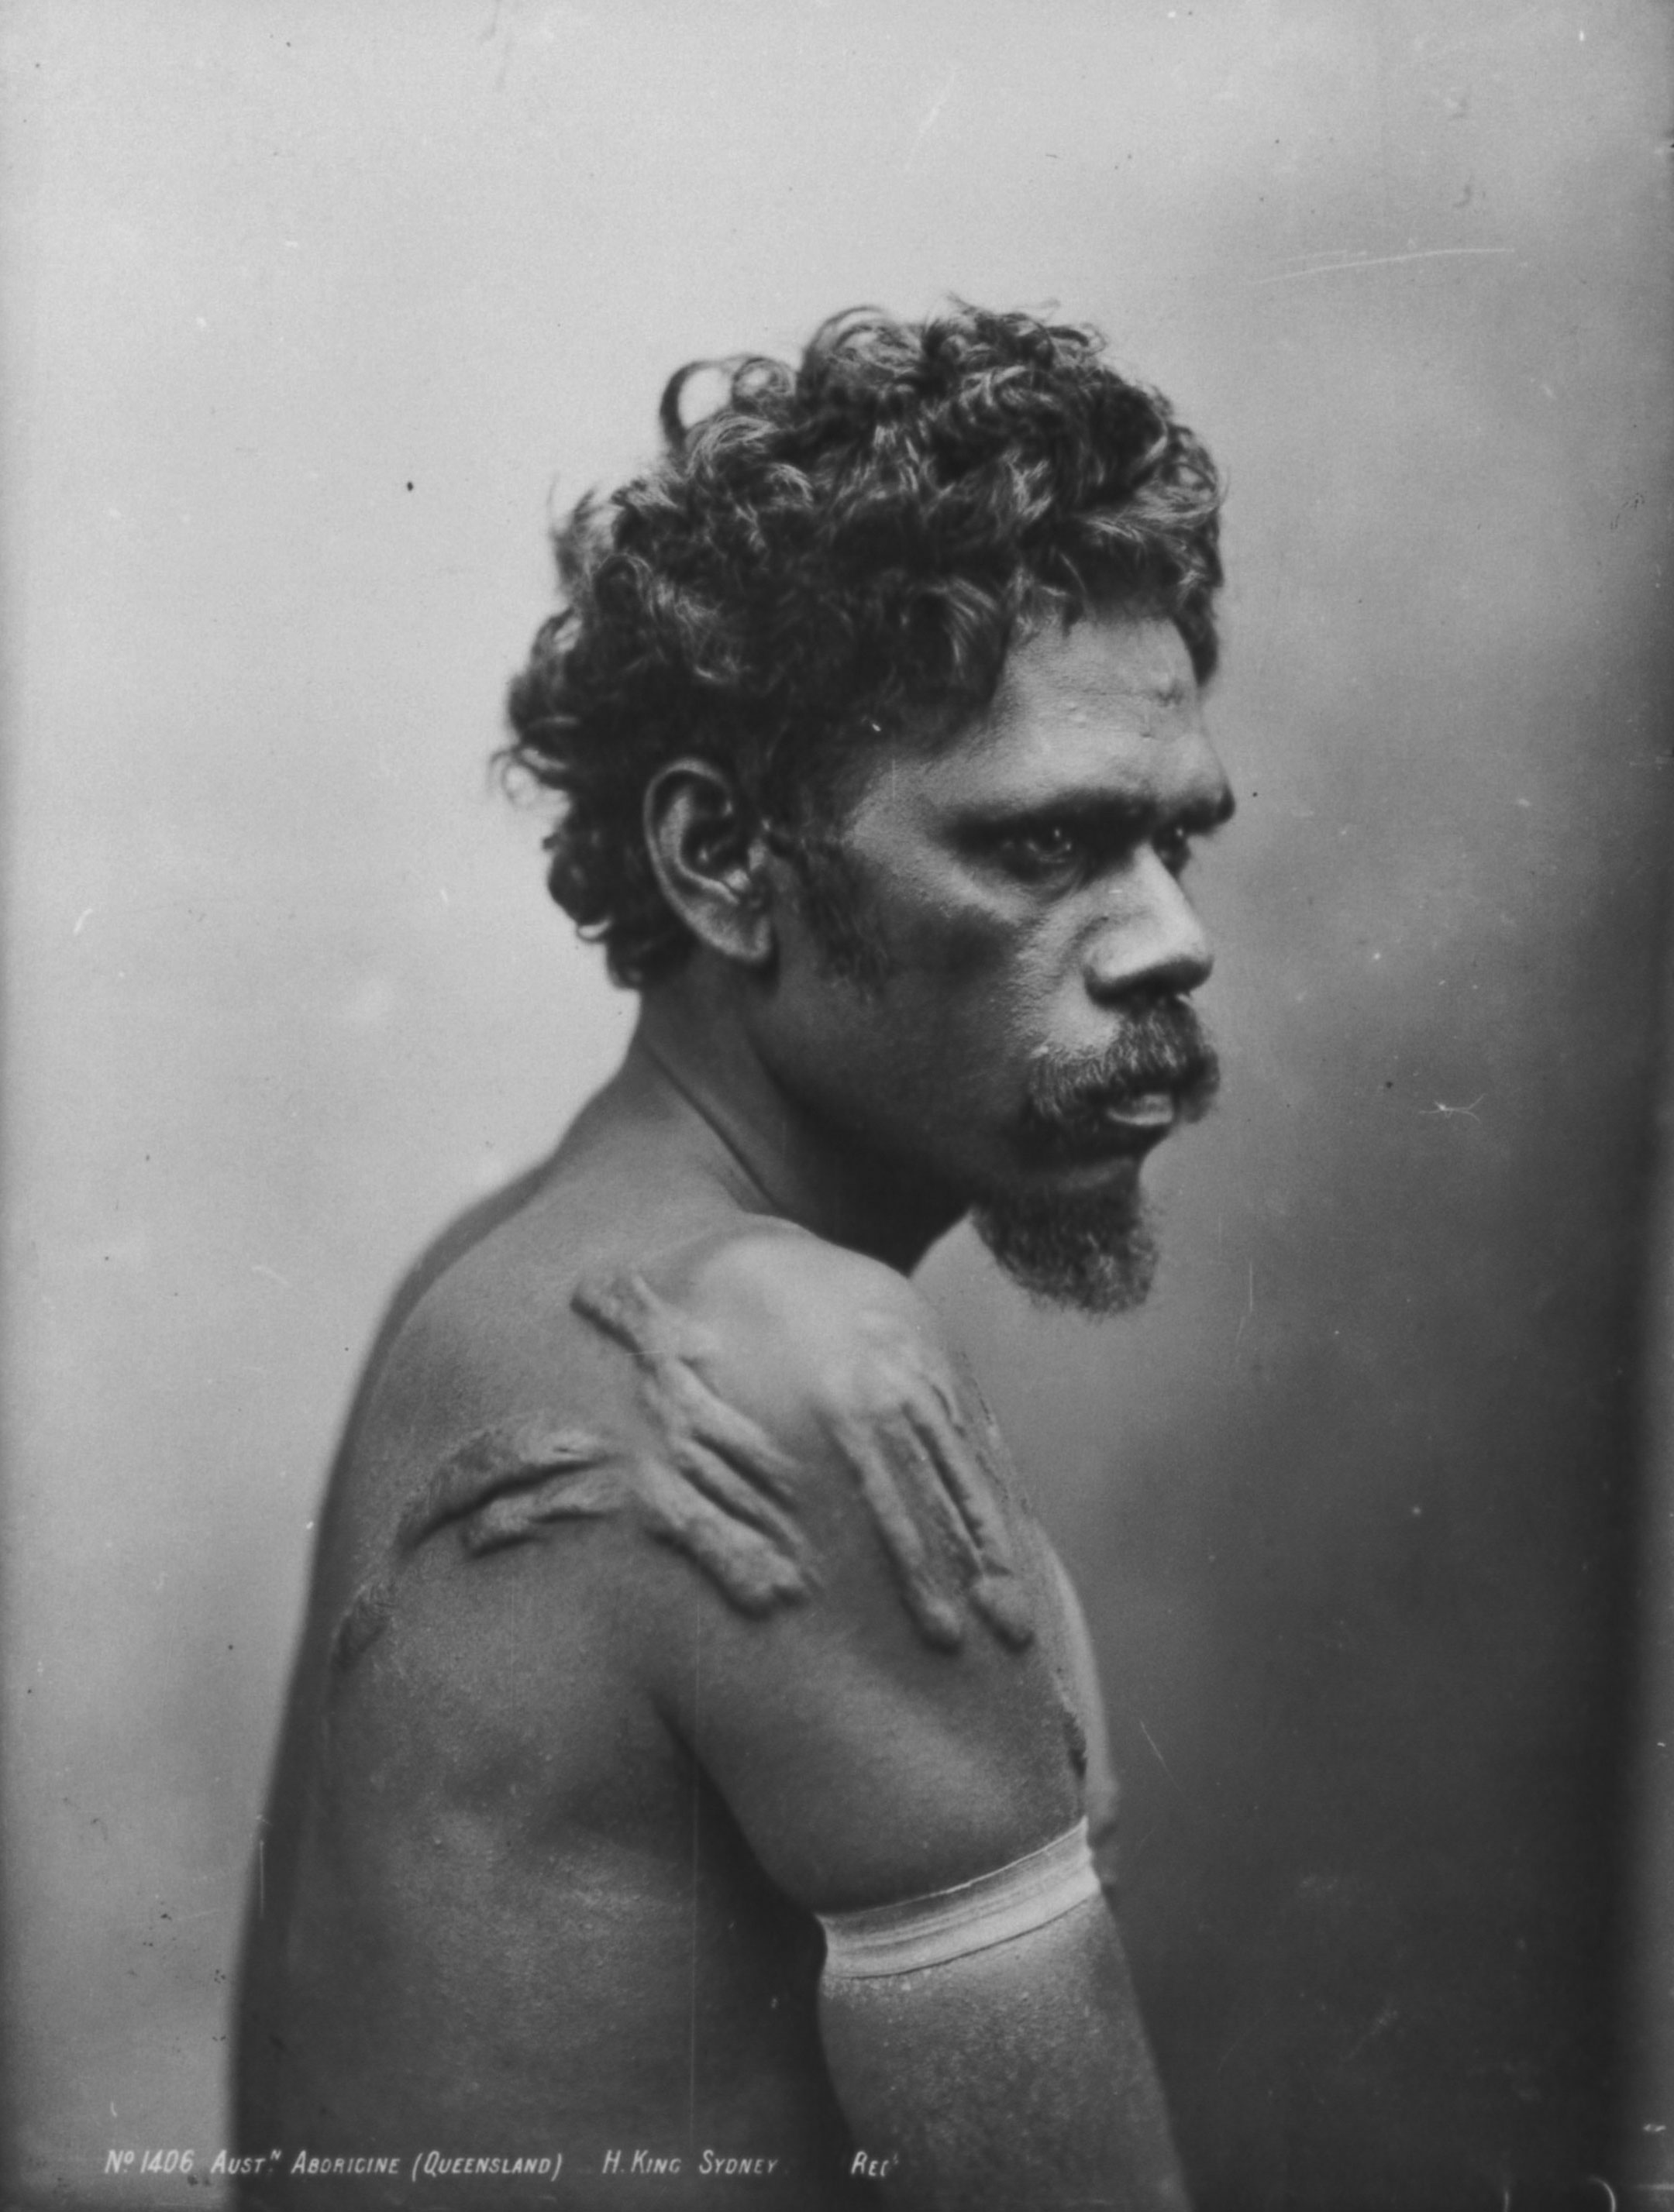 Yungkwa, Sydney, June 1893 (Photo by Henry King, UQ Anthropology Museum Collection)